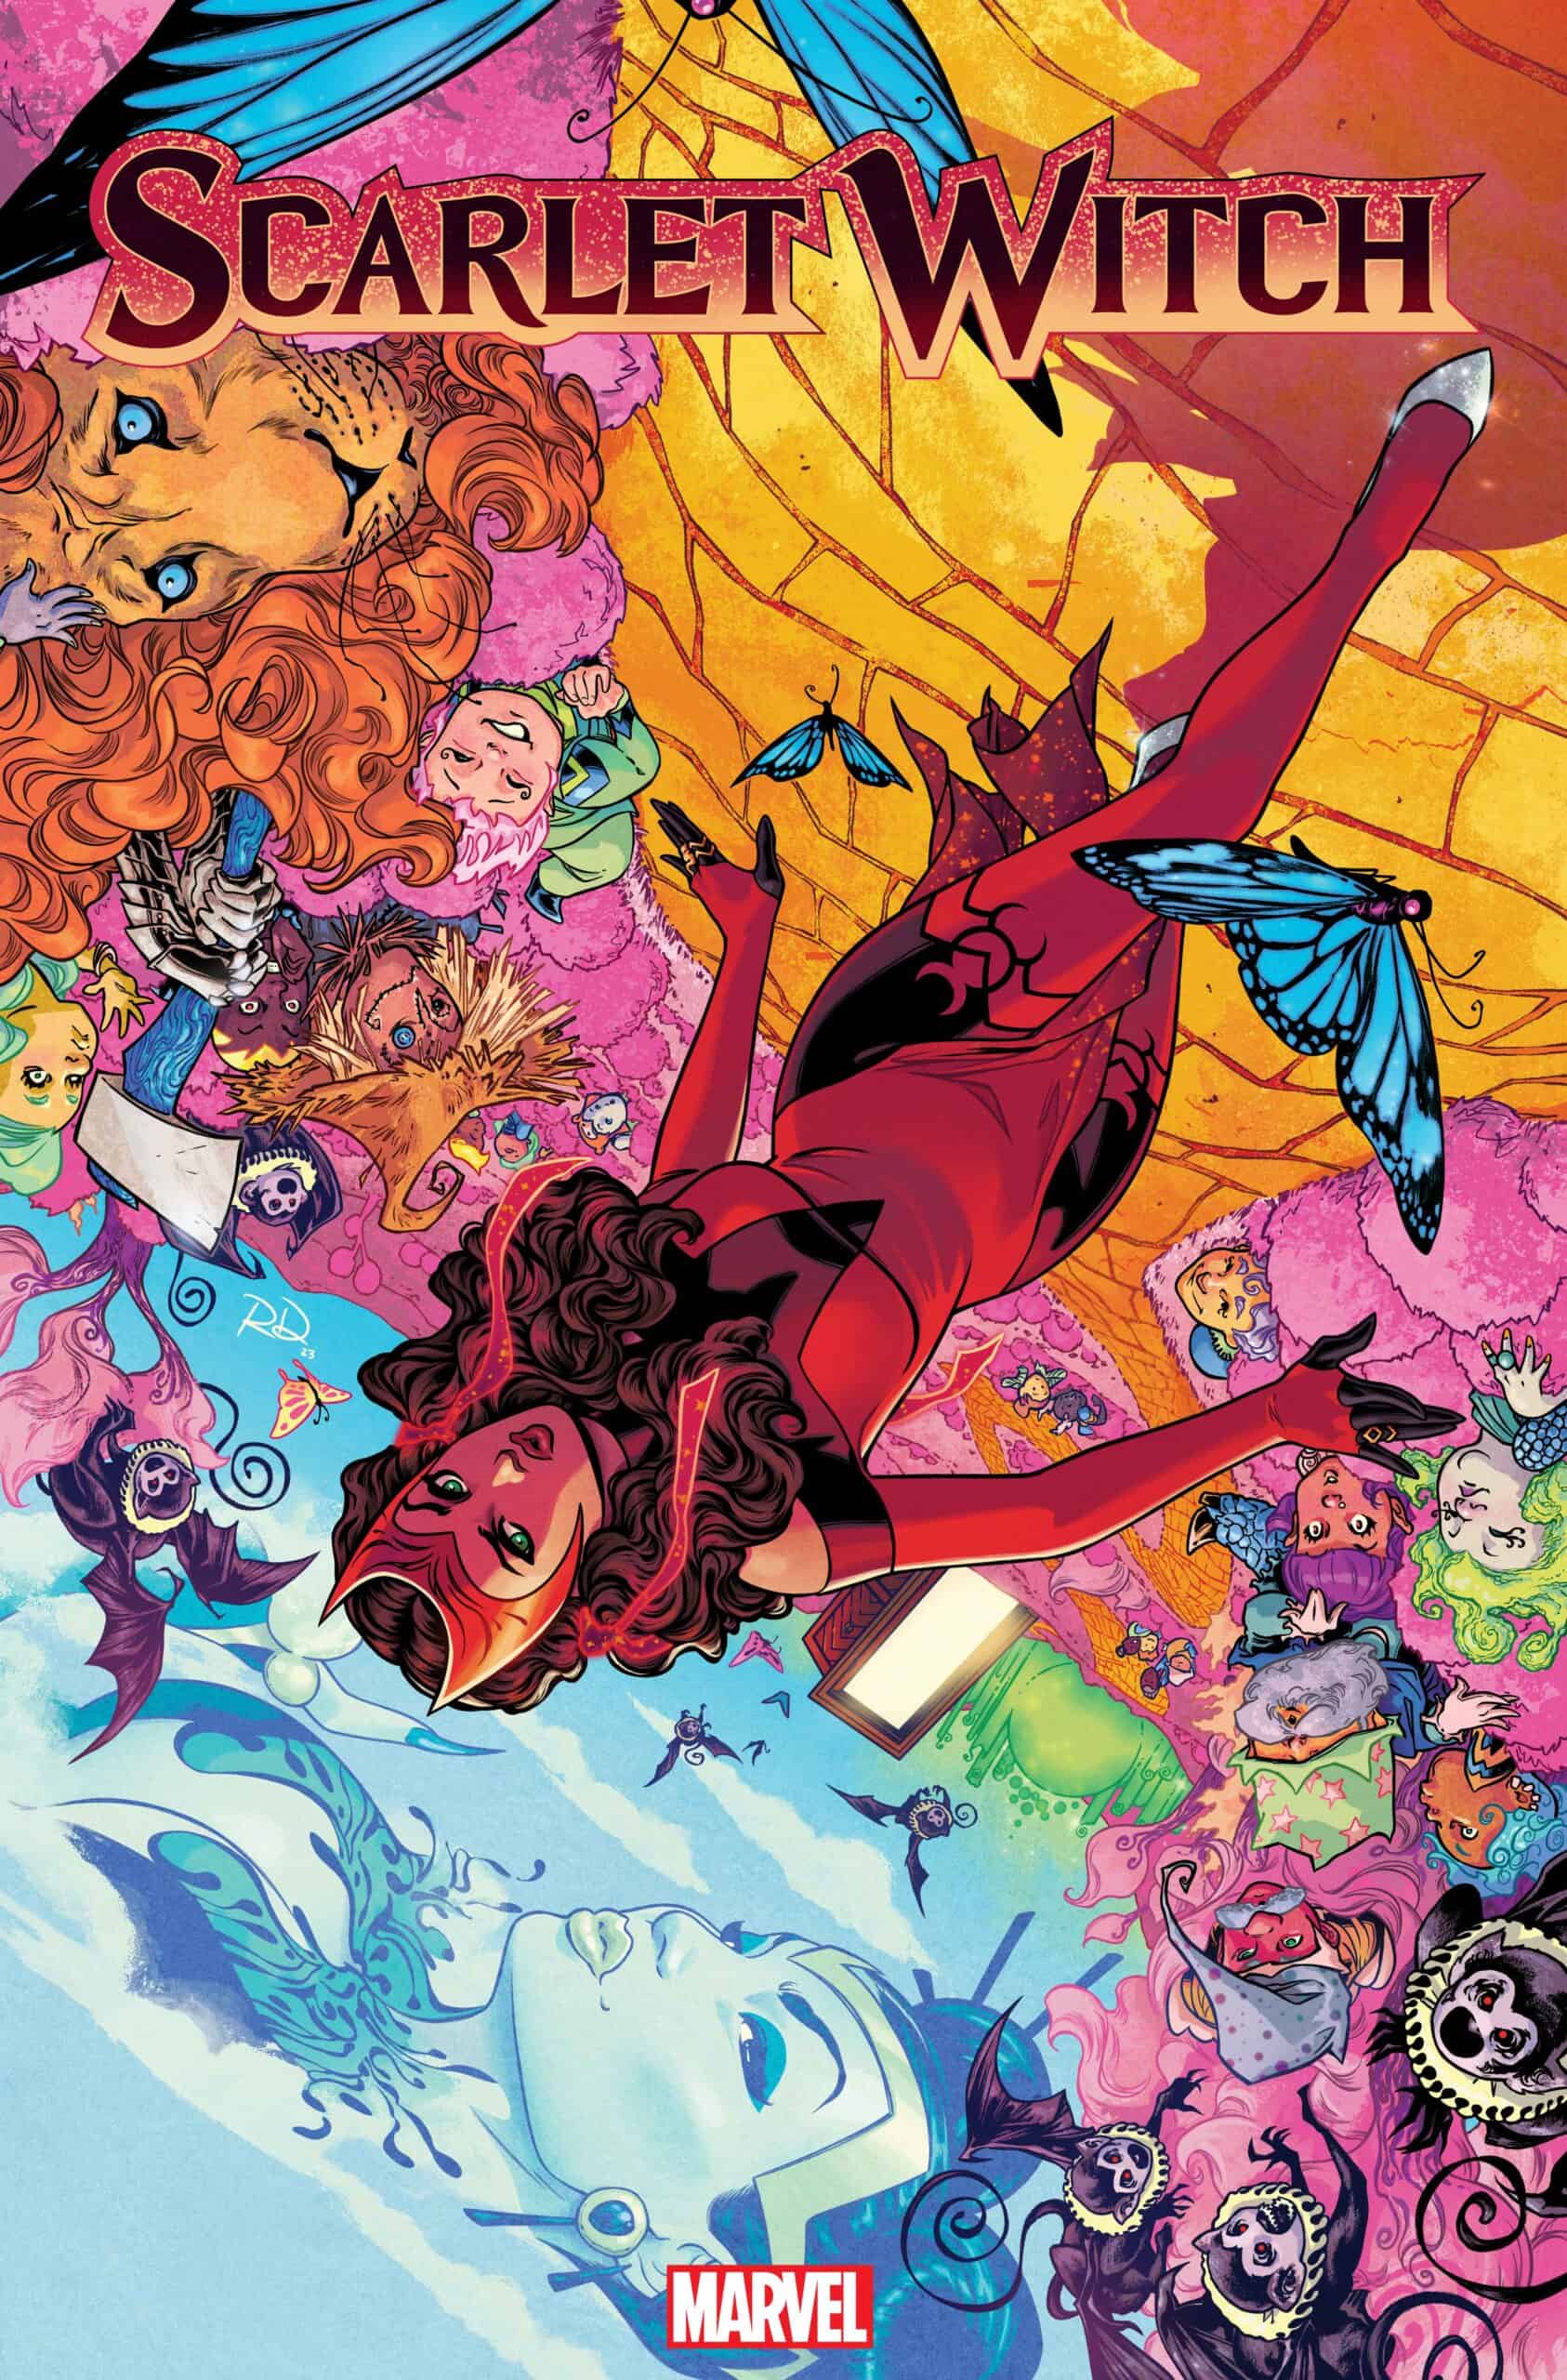 Diving into Comic Books - Scarlet Witch